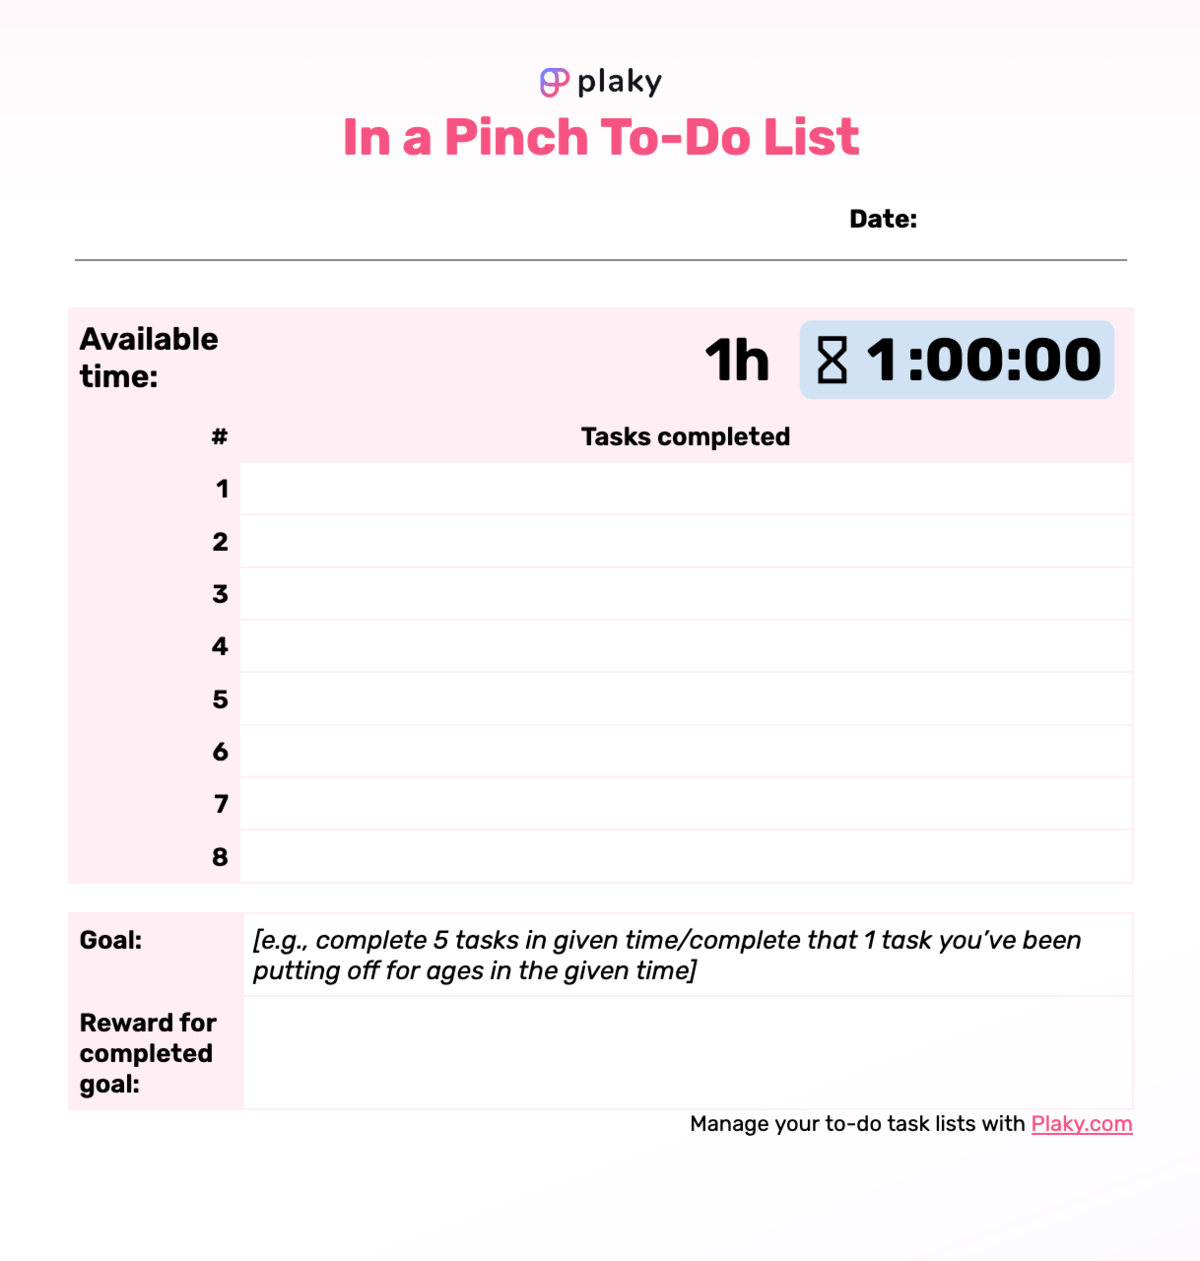 In a pinch to-do list template